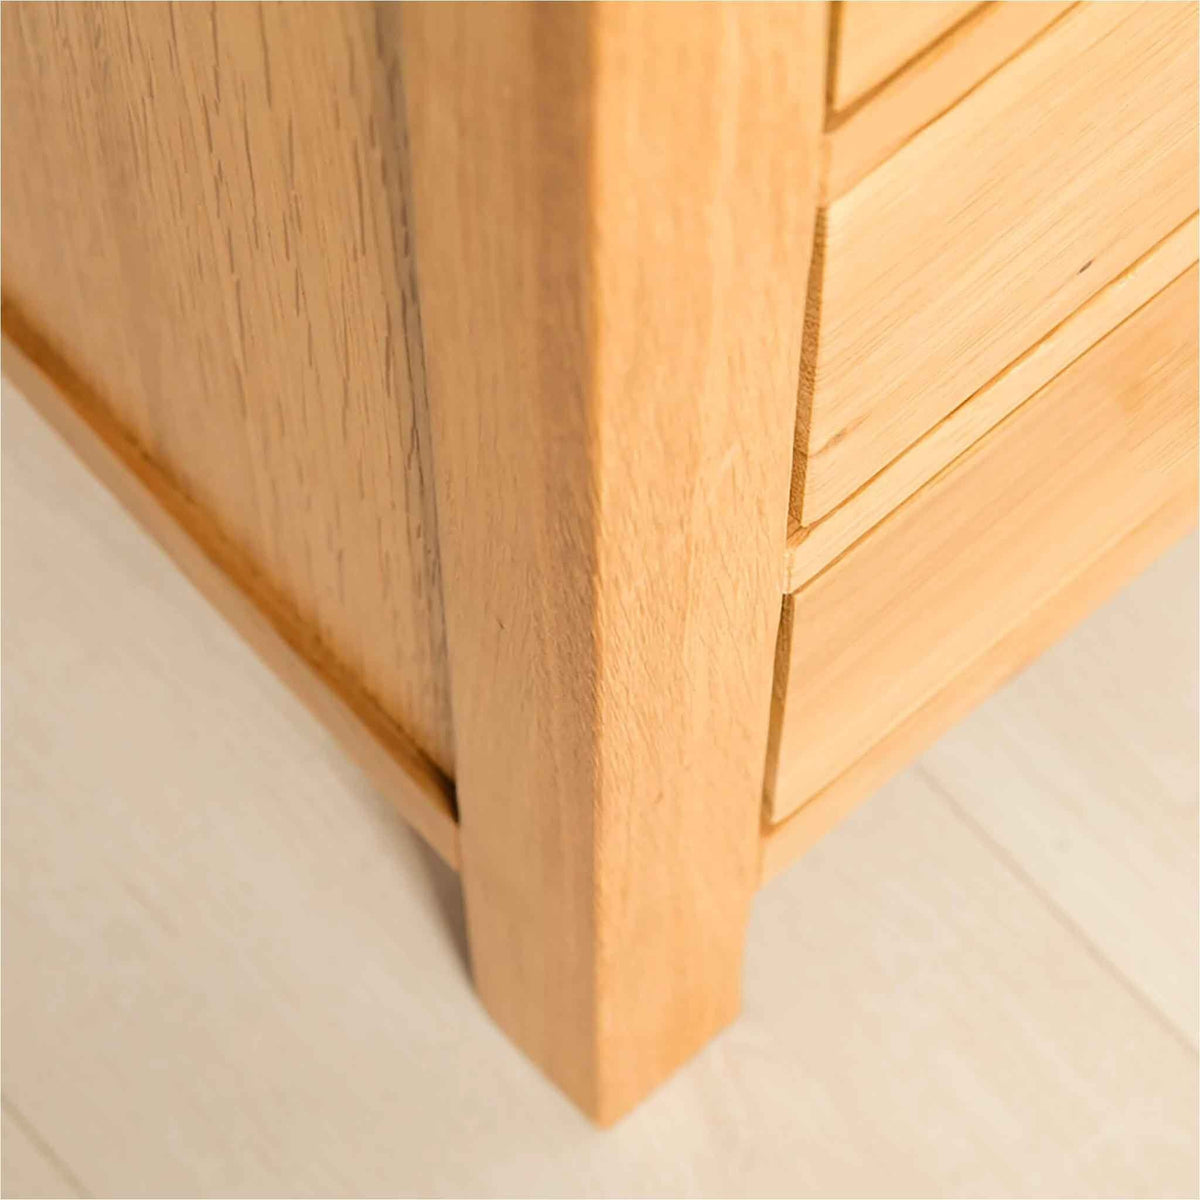 Leg view of the Abbey Light Oak Bedside Table by Roseland Furniture